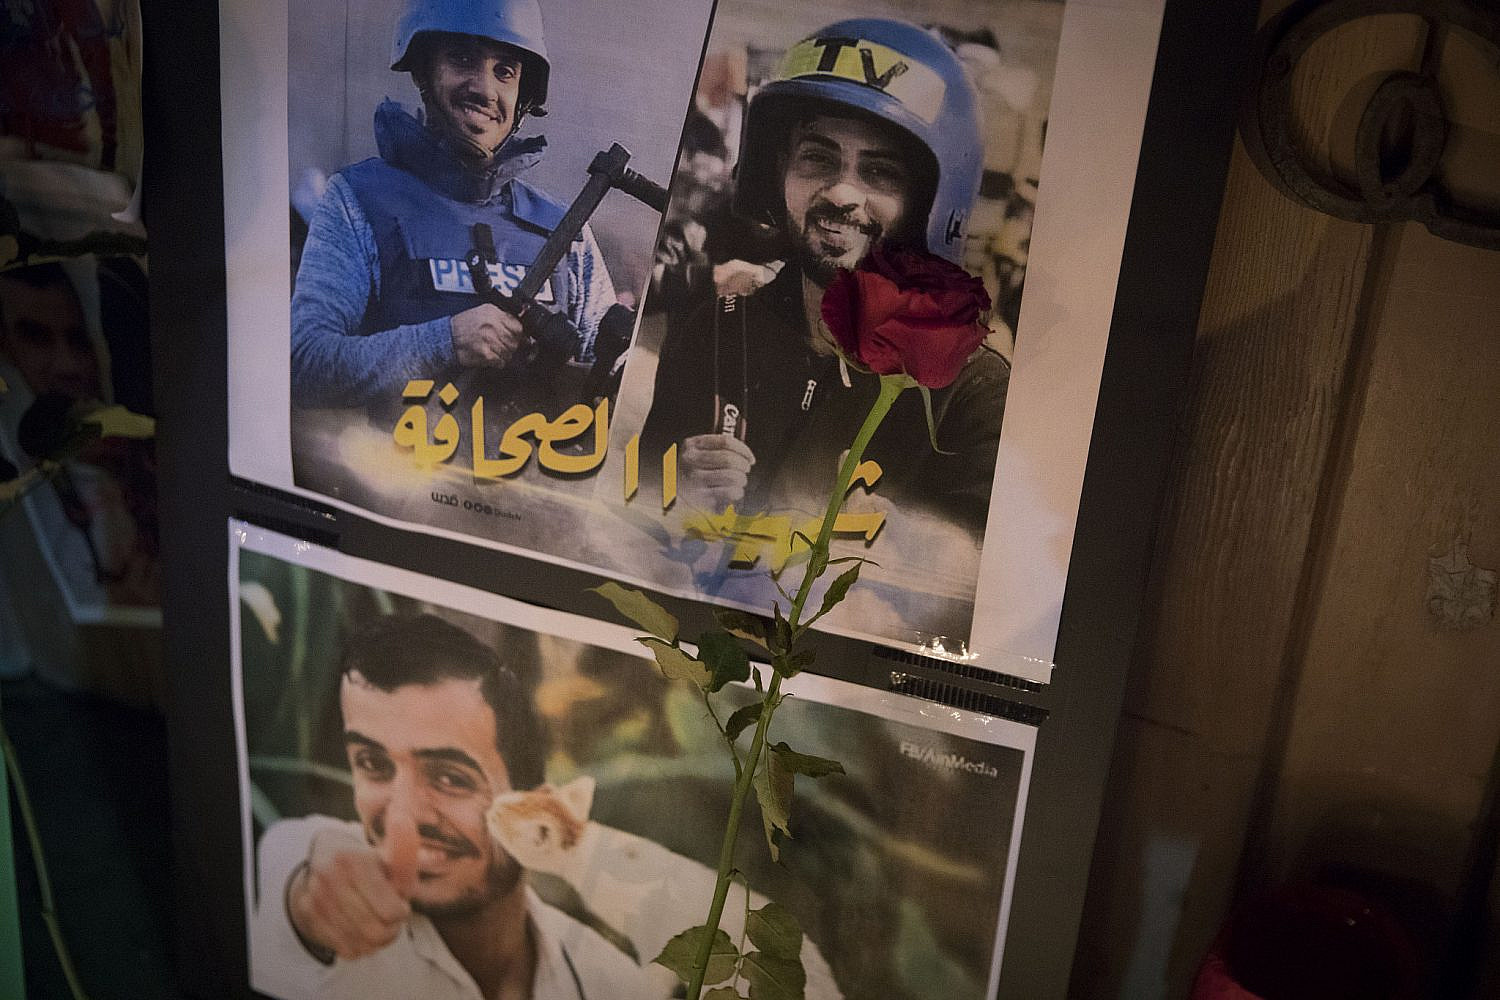 Photos of Palestinian journalists killed by Israeli forces during the #GreatReturnMarch protests in Gaza, are shown during a vigil held by Palestinian citizens of Israel and Israeli activists in solidarity with the people in Gaza, Jaffa, April 27, 2018. (Oren Ziv/Activestills)